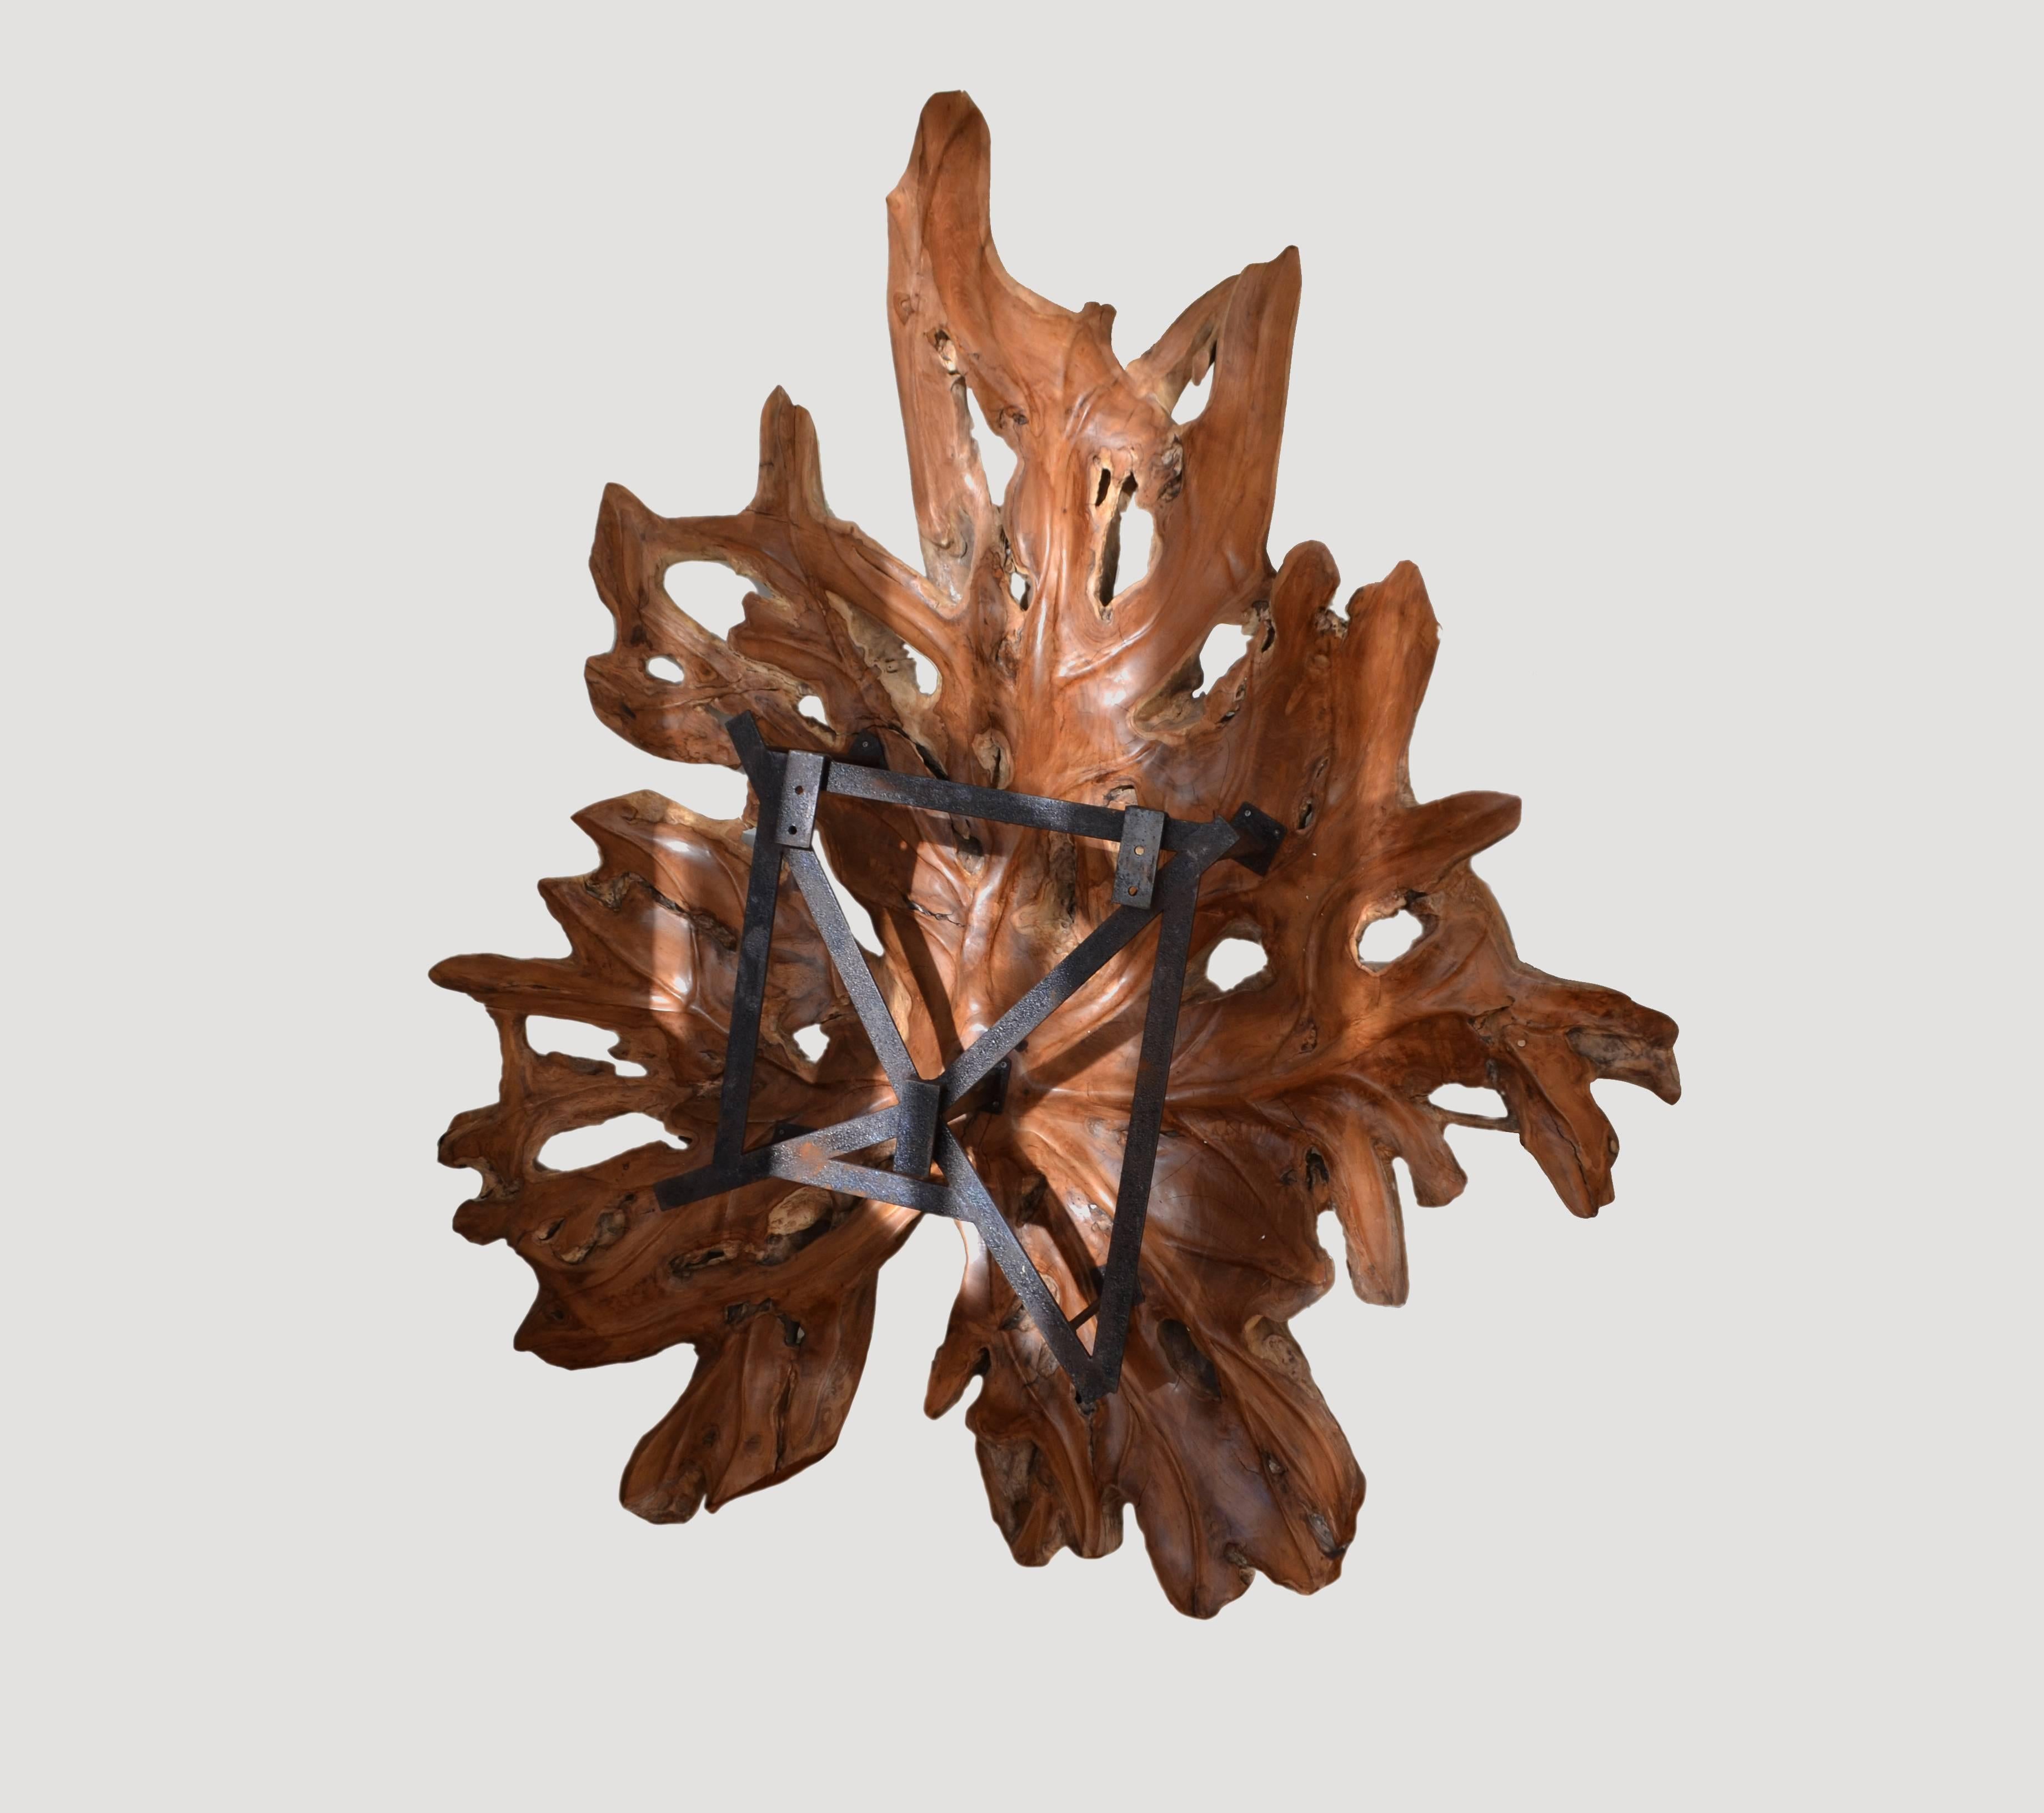 Giant organic teak wood leaf sculpture. Hand-carved from a single slab. This is a beautiful wall sculpture that comes with the hardware as seen. Recessed, with lights behind, it will be a fabulous light fixture.

Andrianna Shamaris, Inc. The Leader